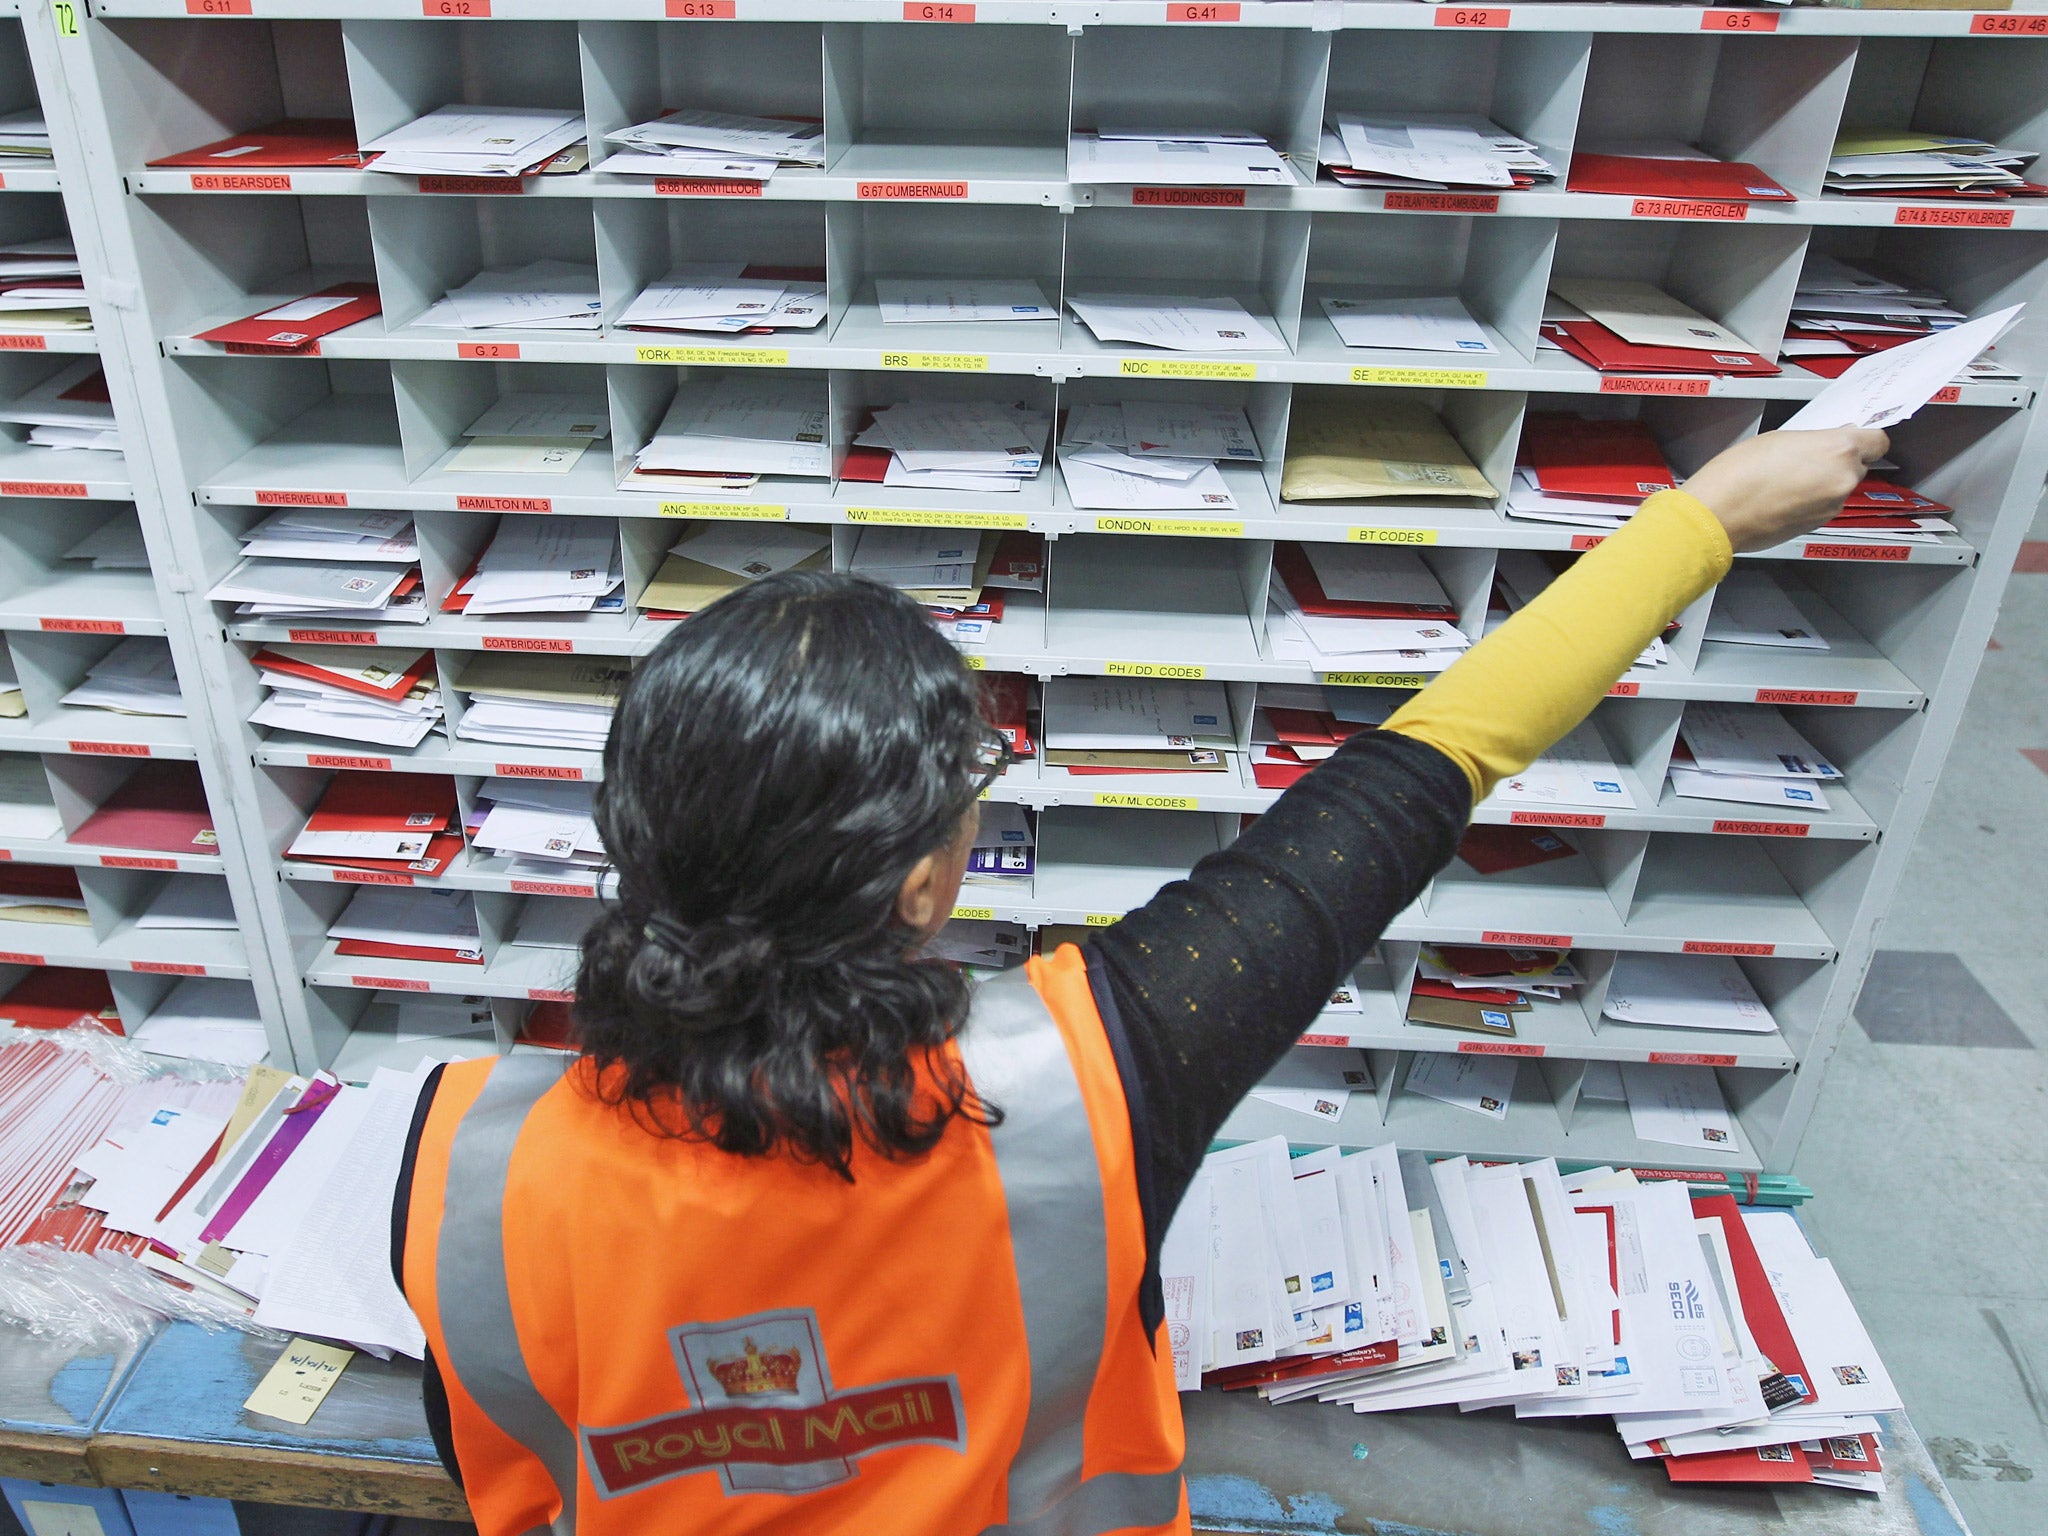 A Royal Mail worker handles mail at a sorting office